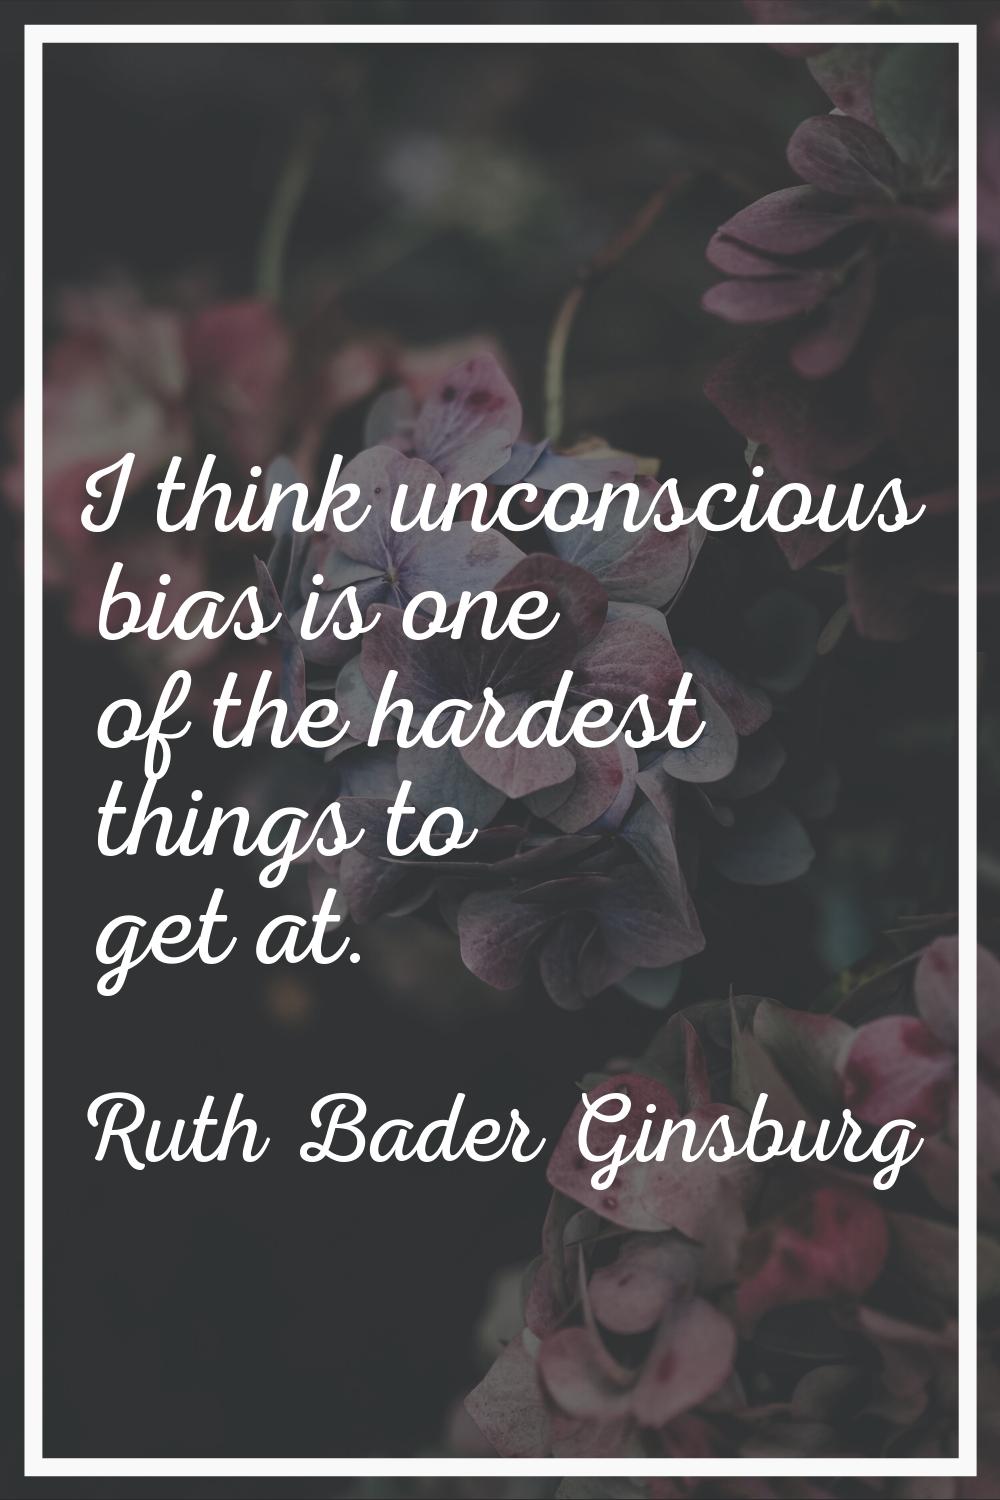 I think unconscious bias is one of the hardest things to get at.